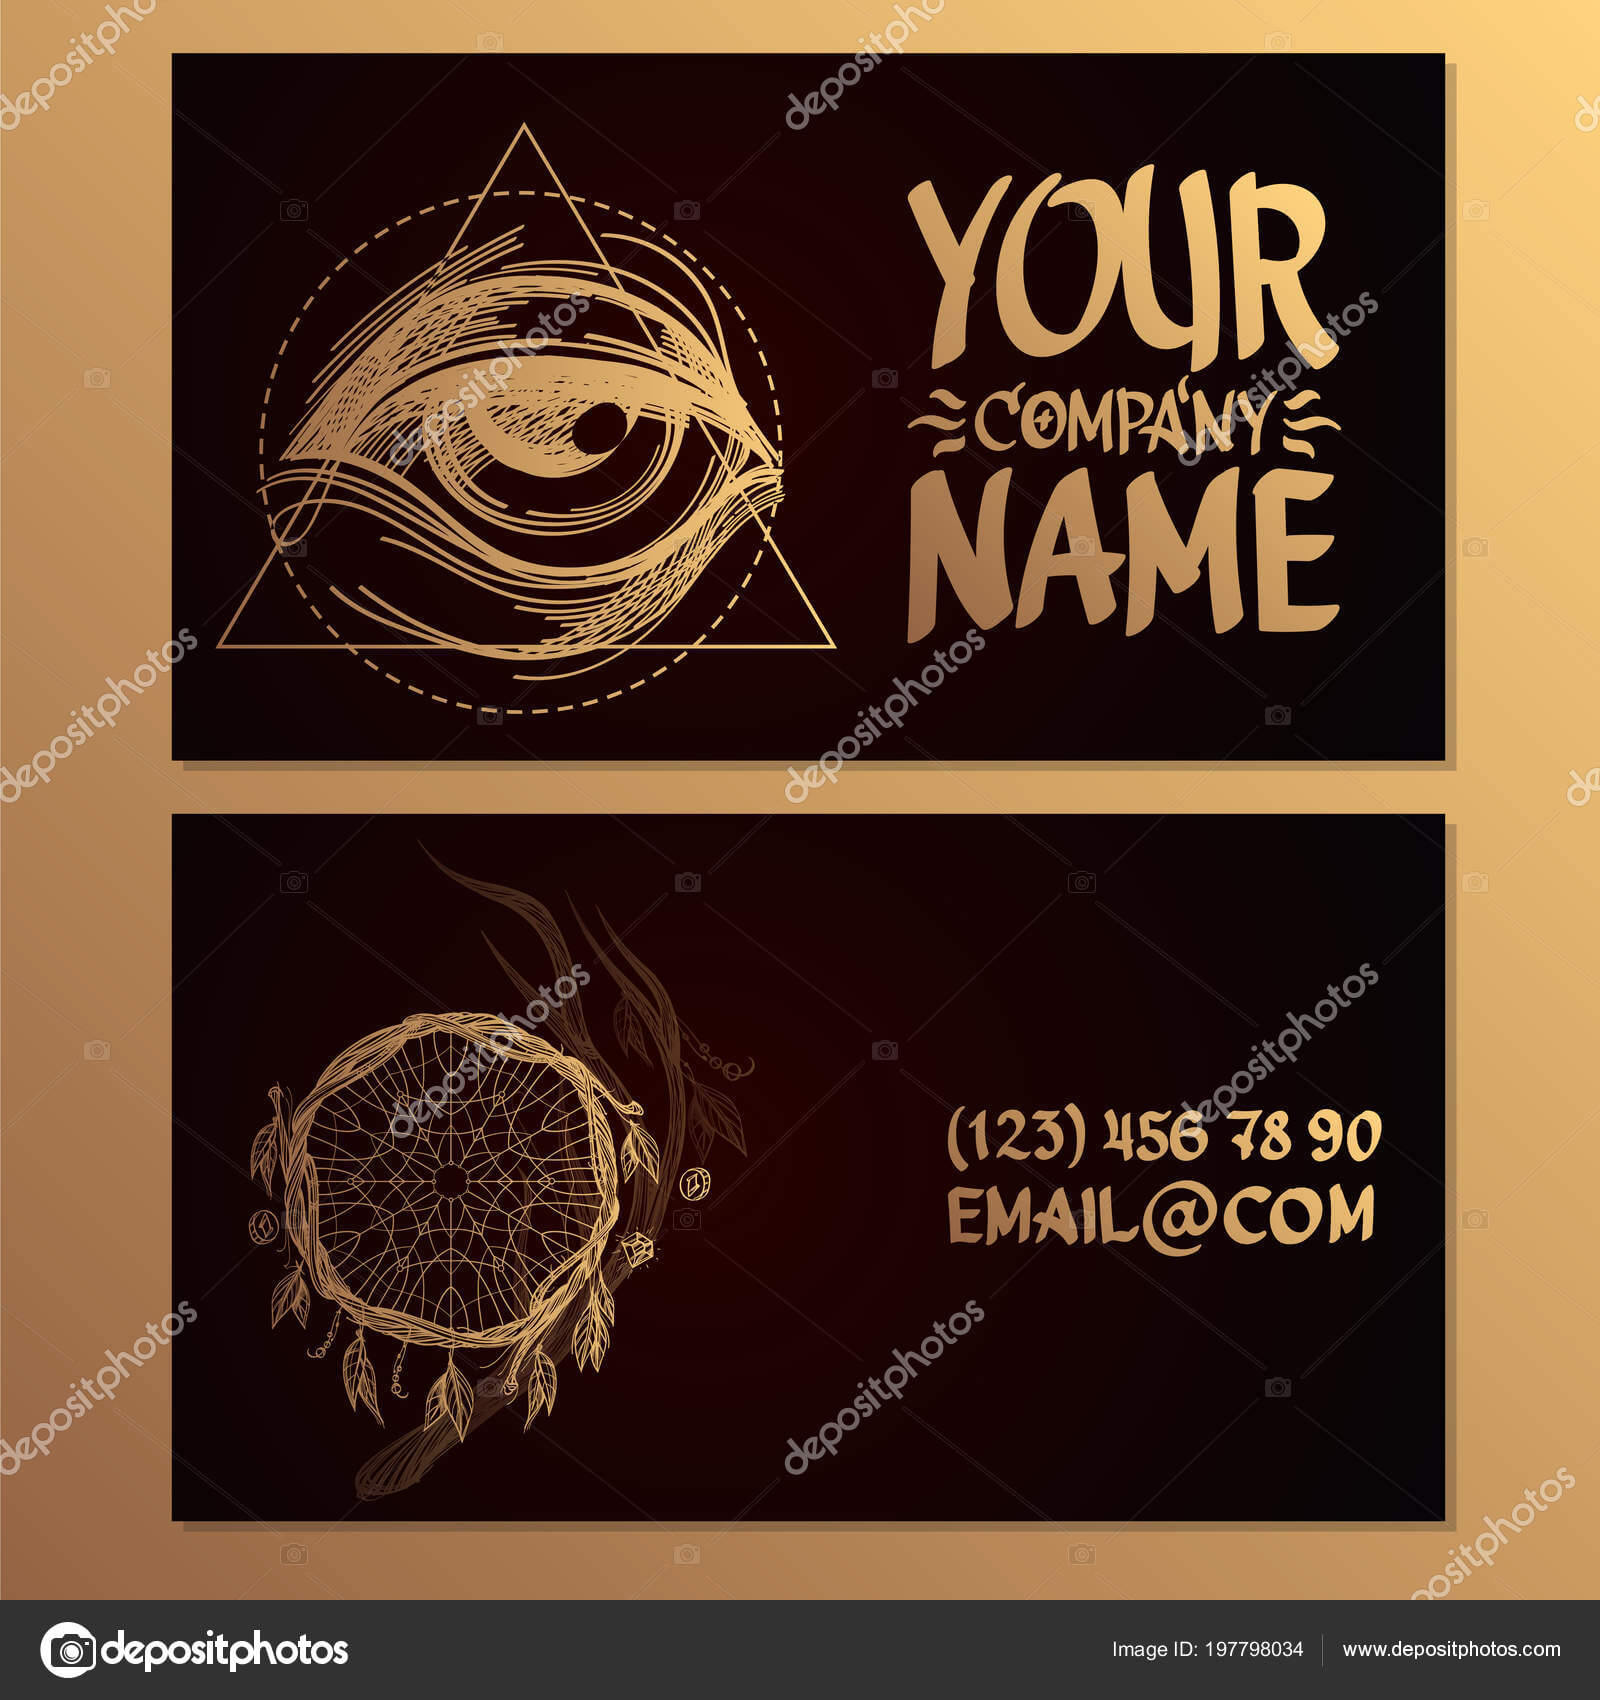 Cards Image Eye Catcher Dreams Templates Creating Business For Advertising Cards Templates